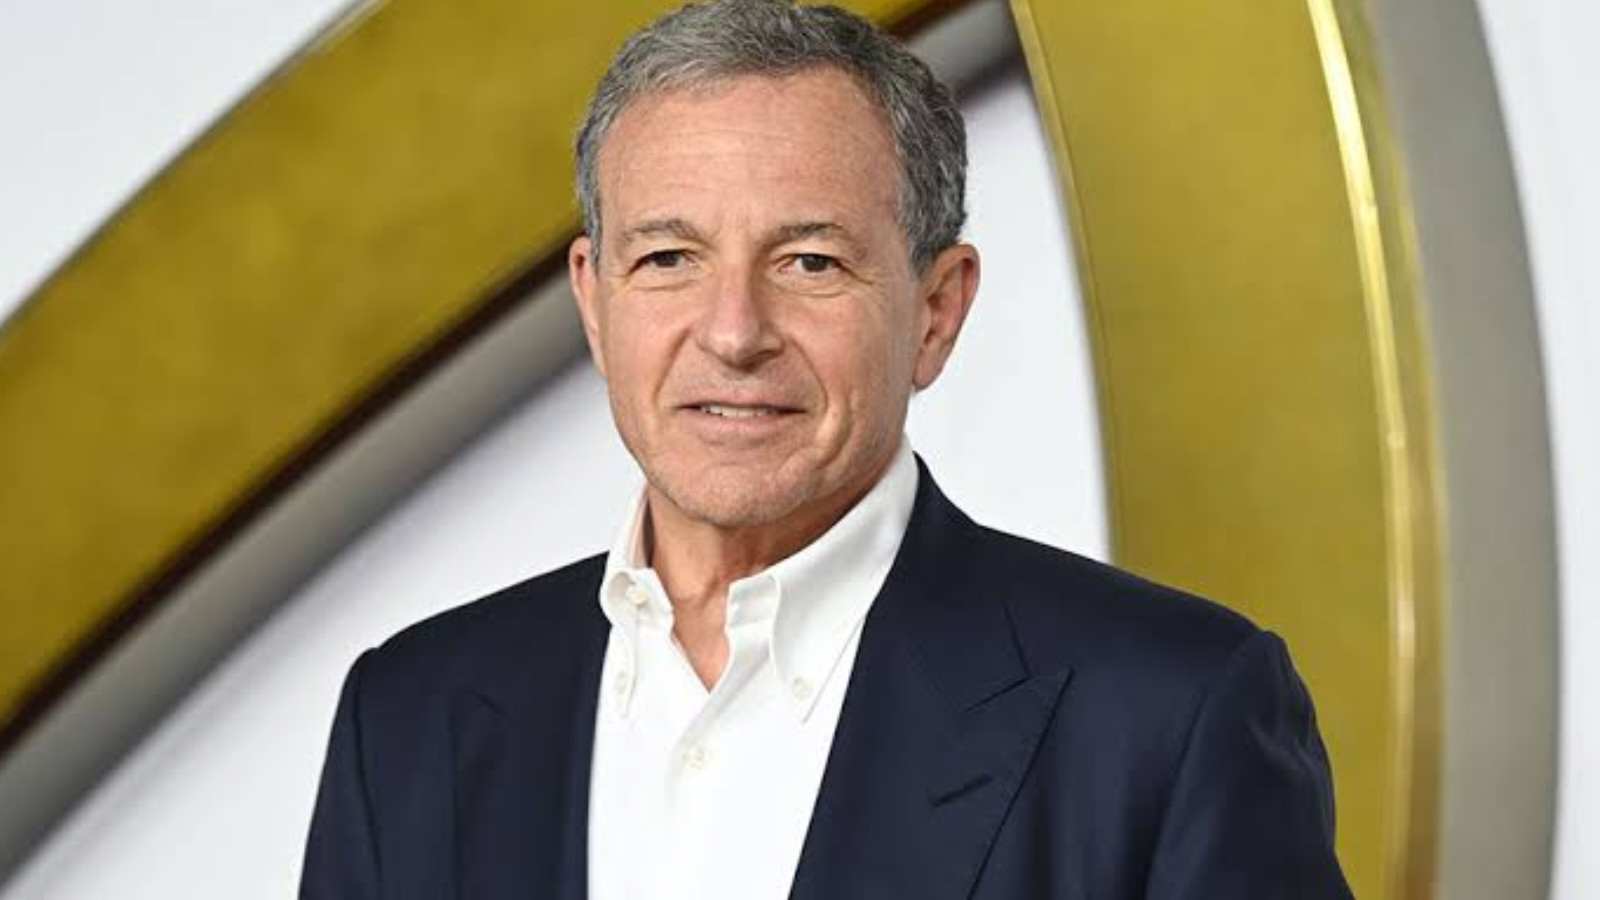 Bob Iger is the new CEO of Disney